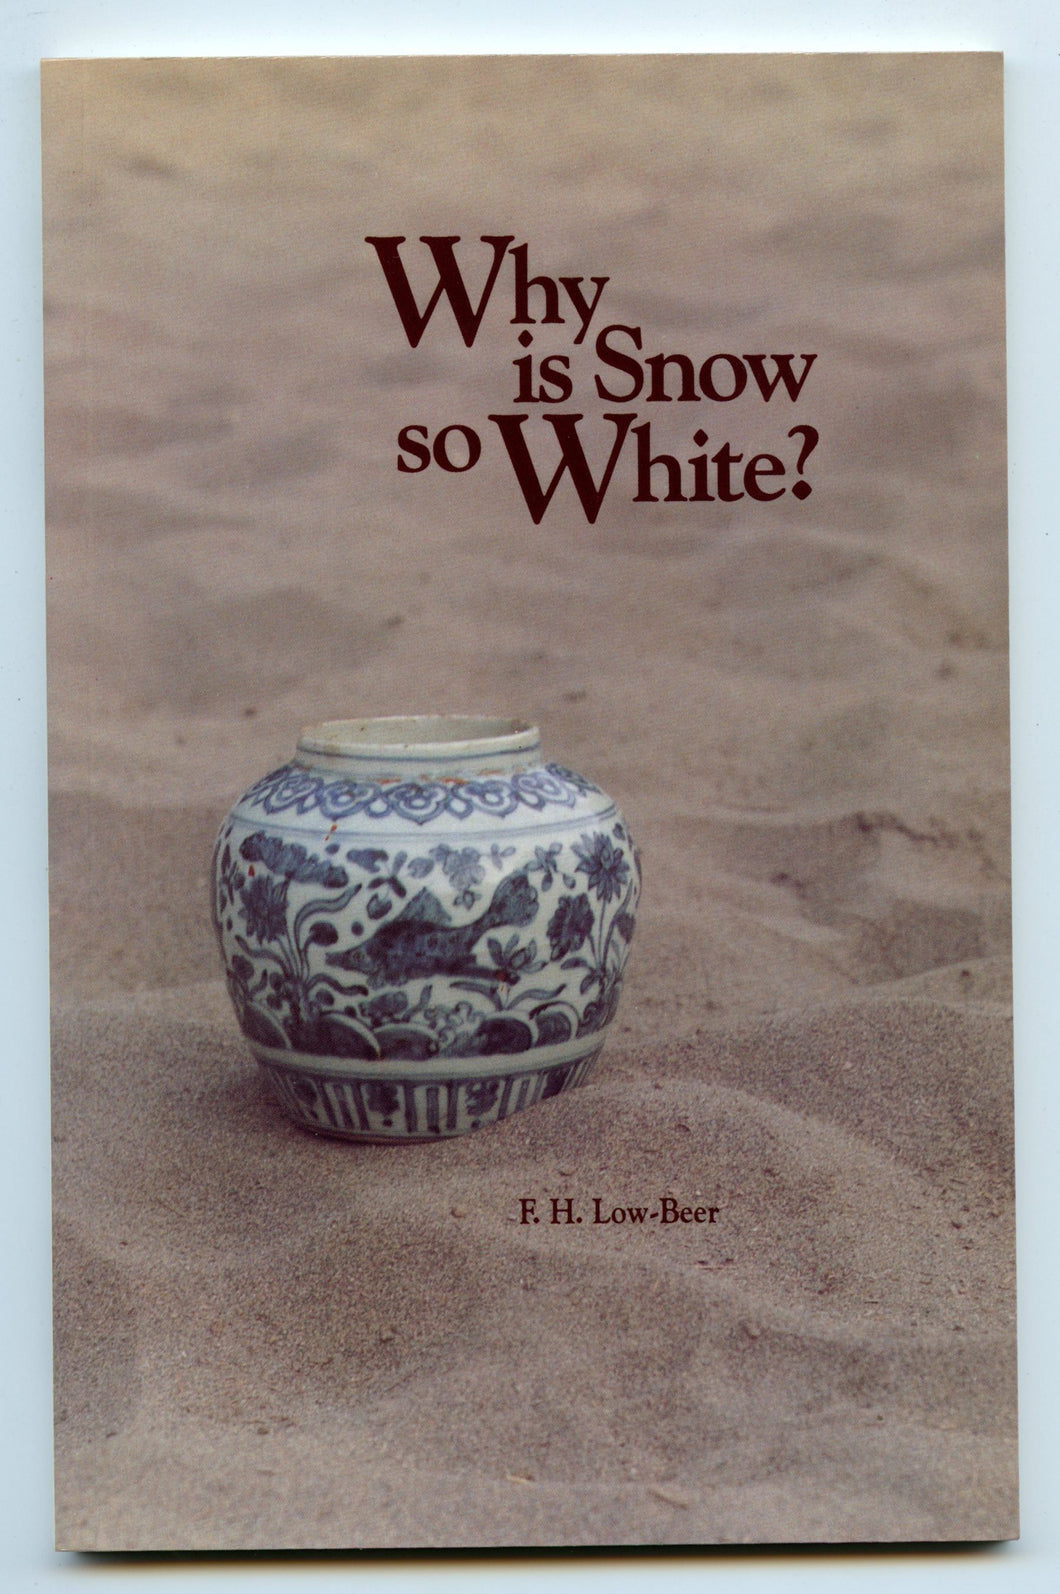 Why is Snow so White?